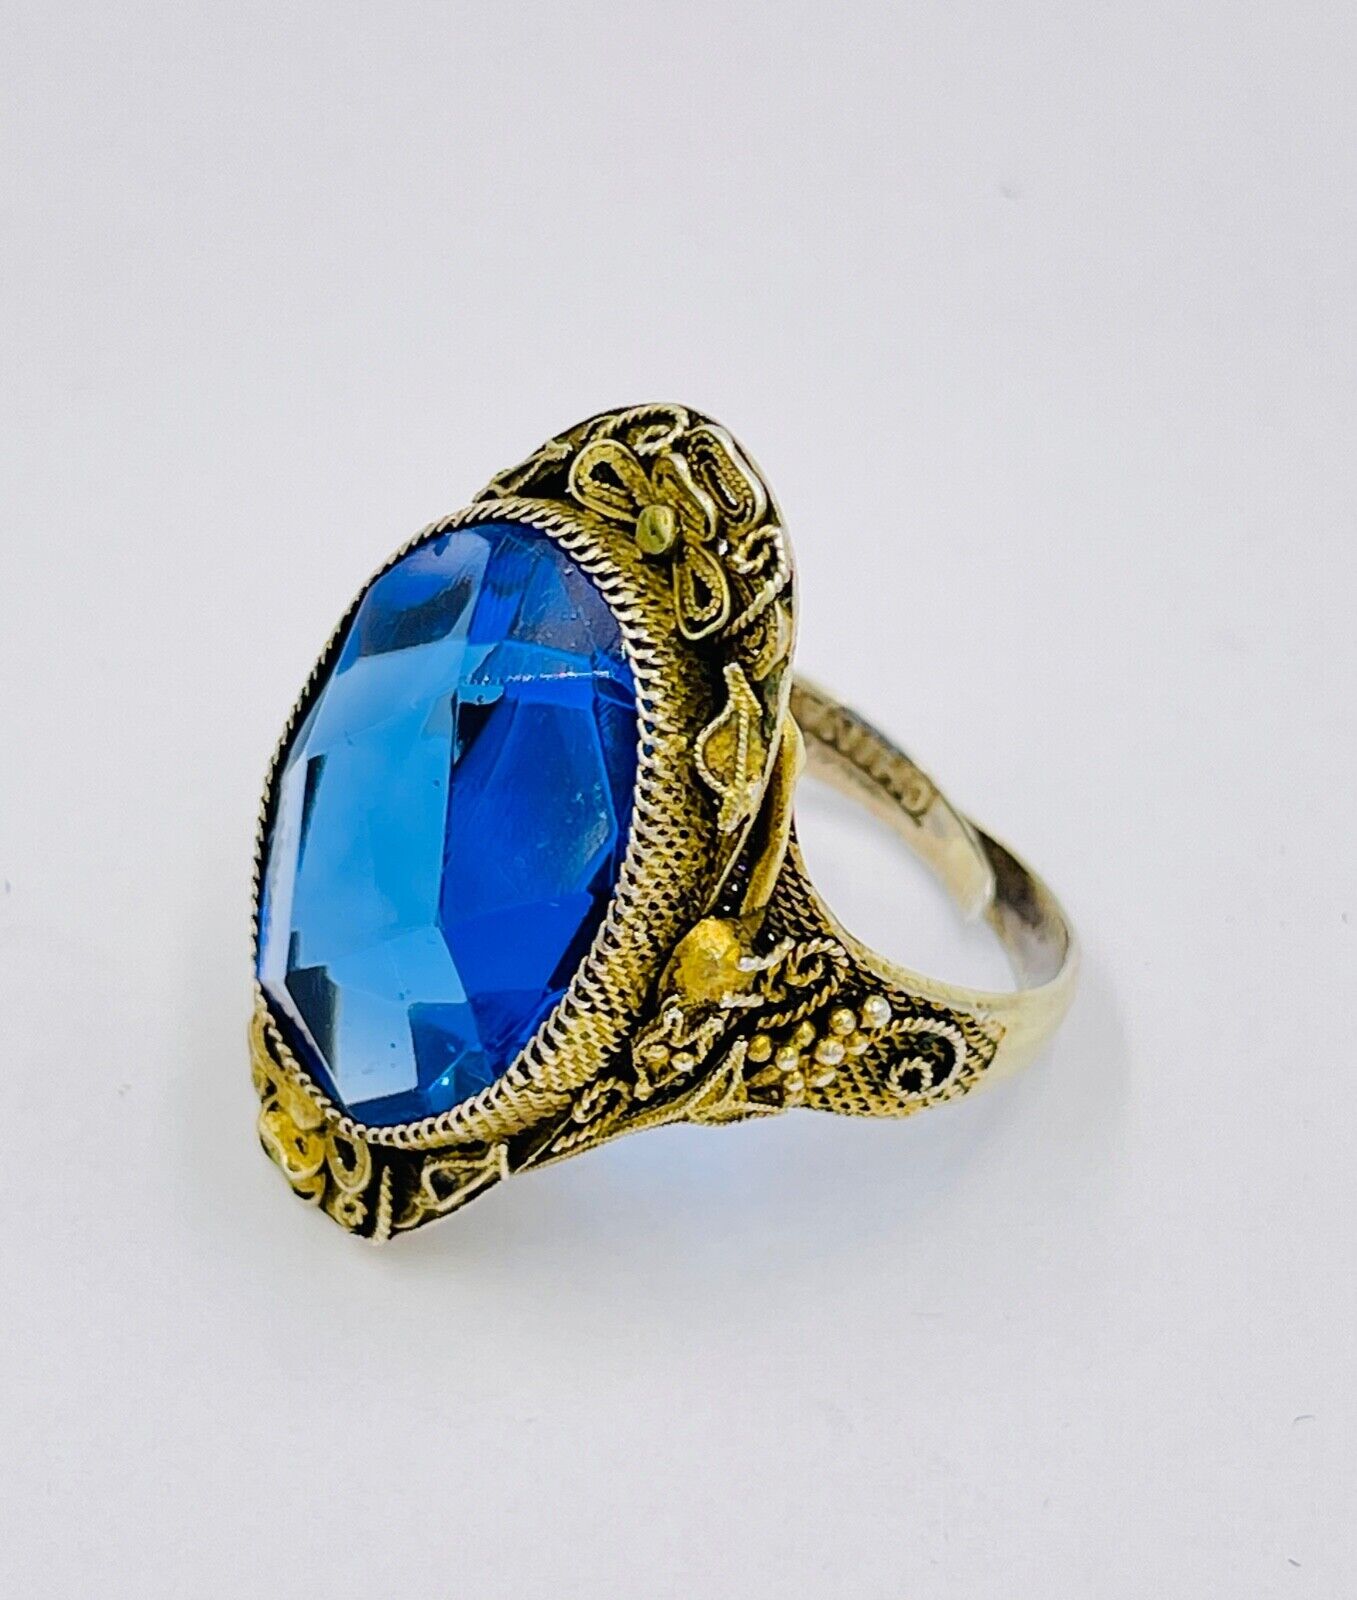 Antique Chinese Sterling Silver Filigree blue stone Ring Size 9 Adjustable